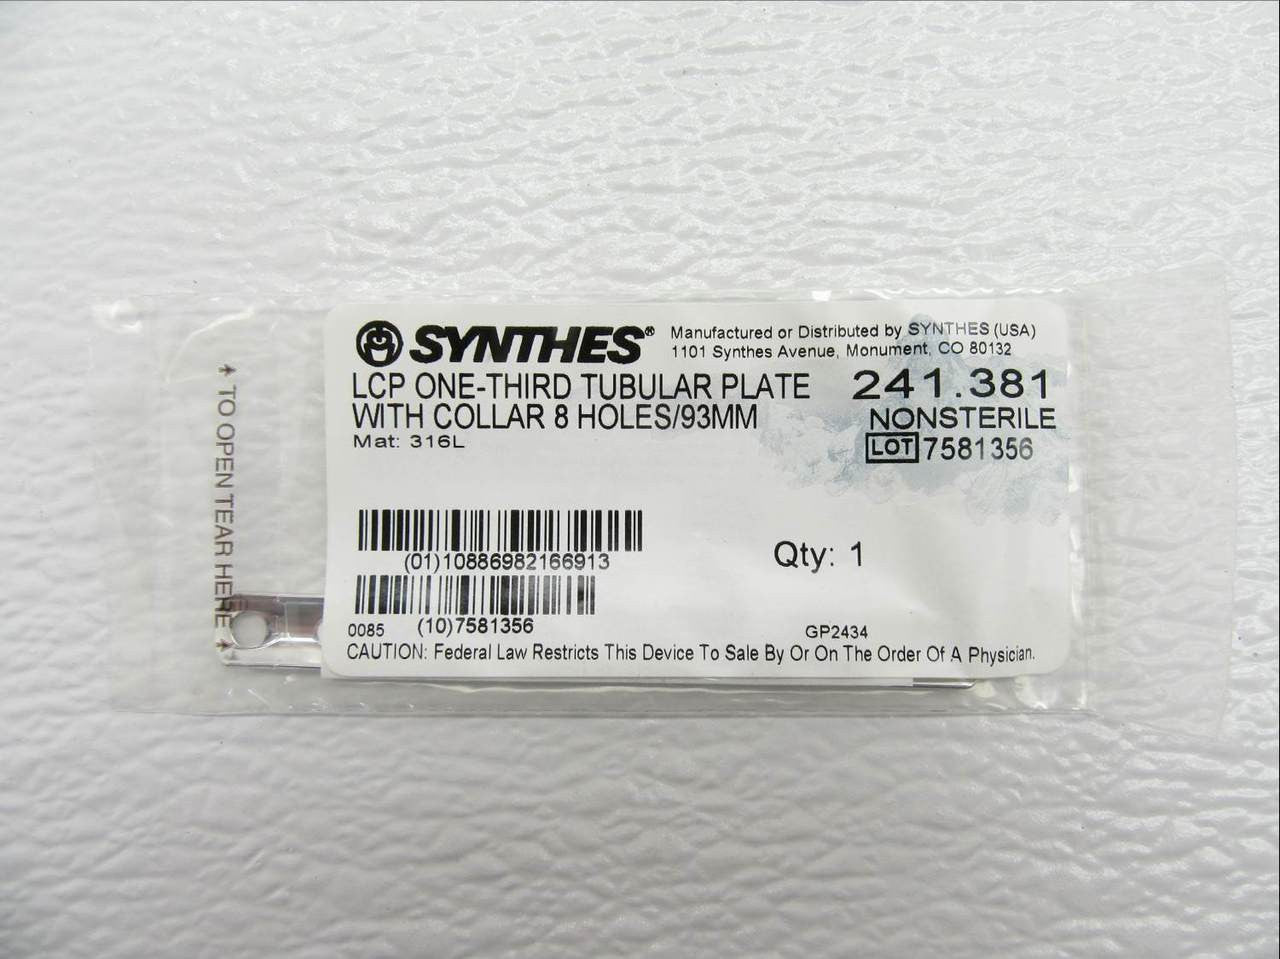    Synthes LCP One Third Tubular Plate with Collar - 241.381